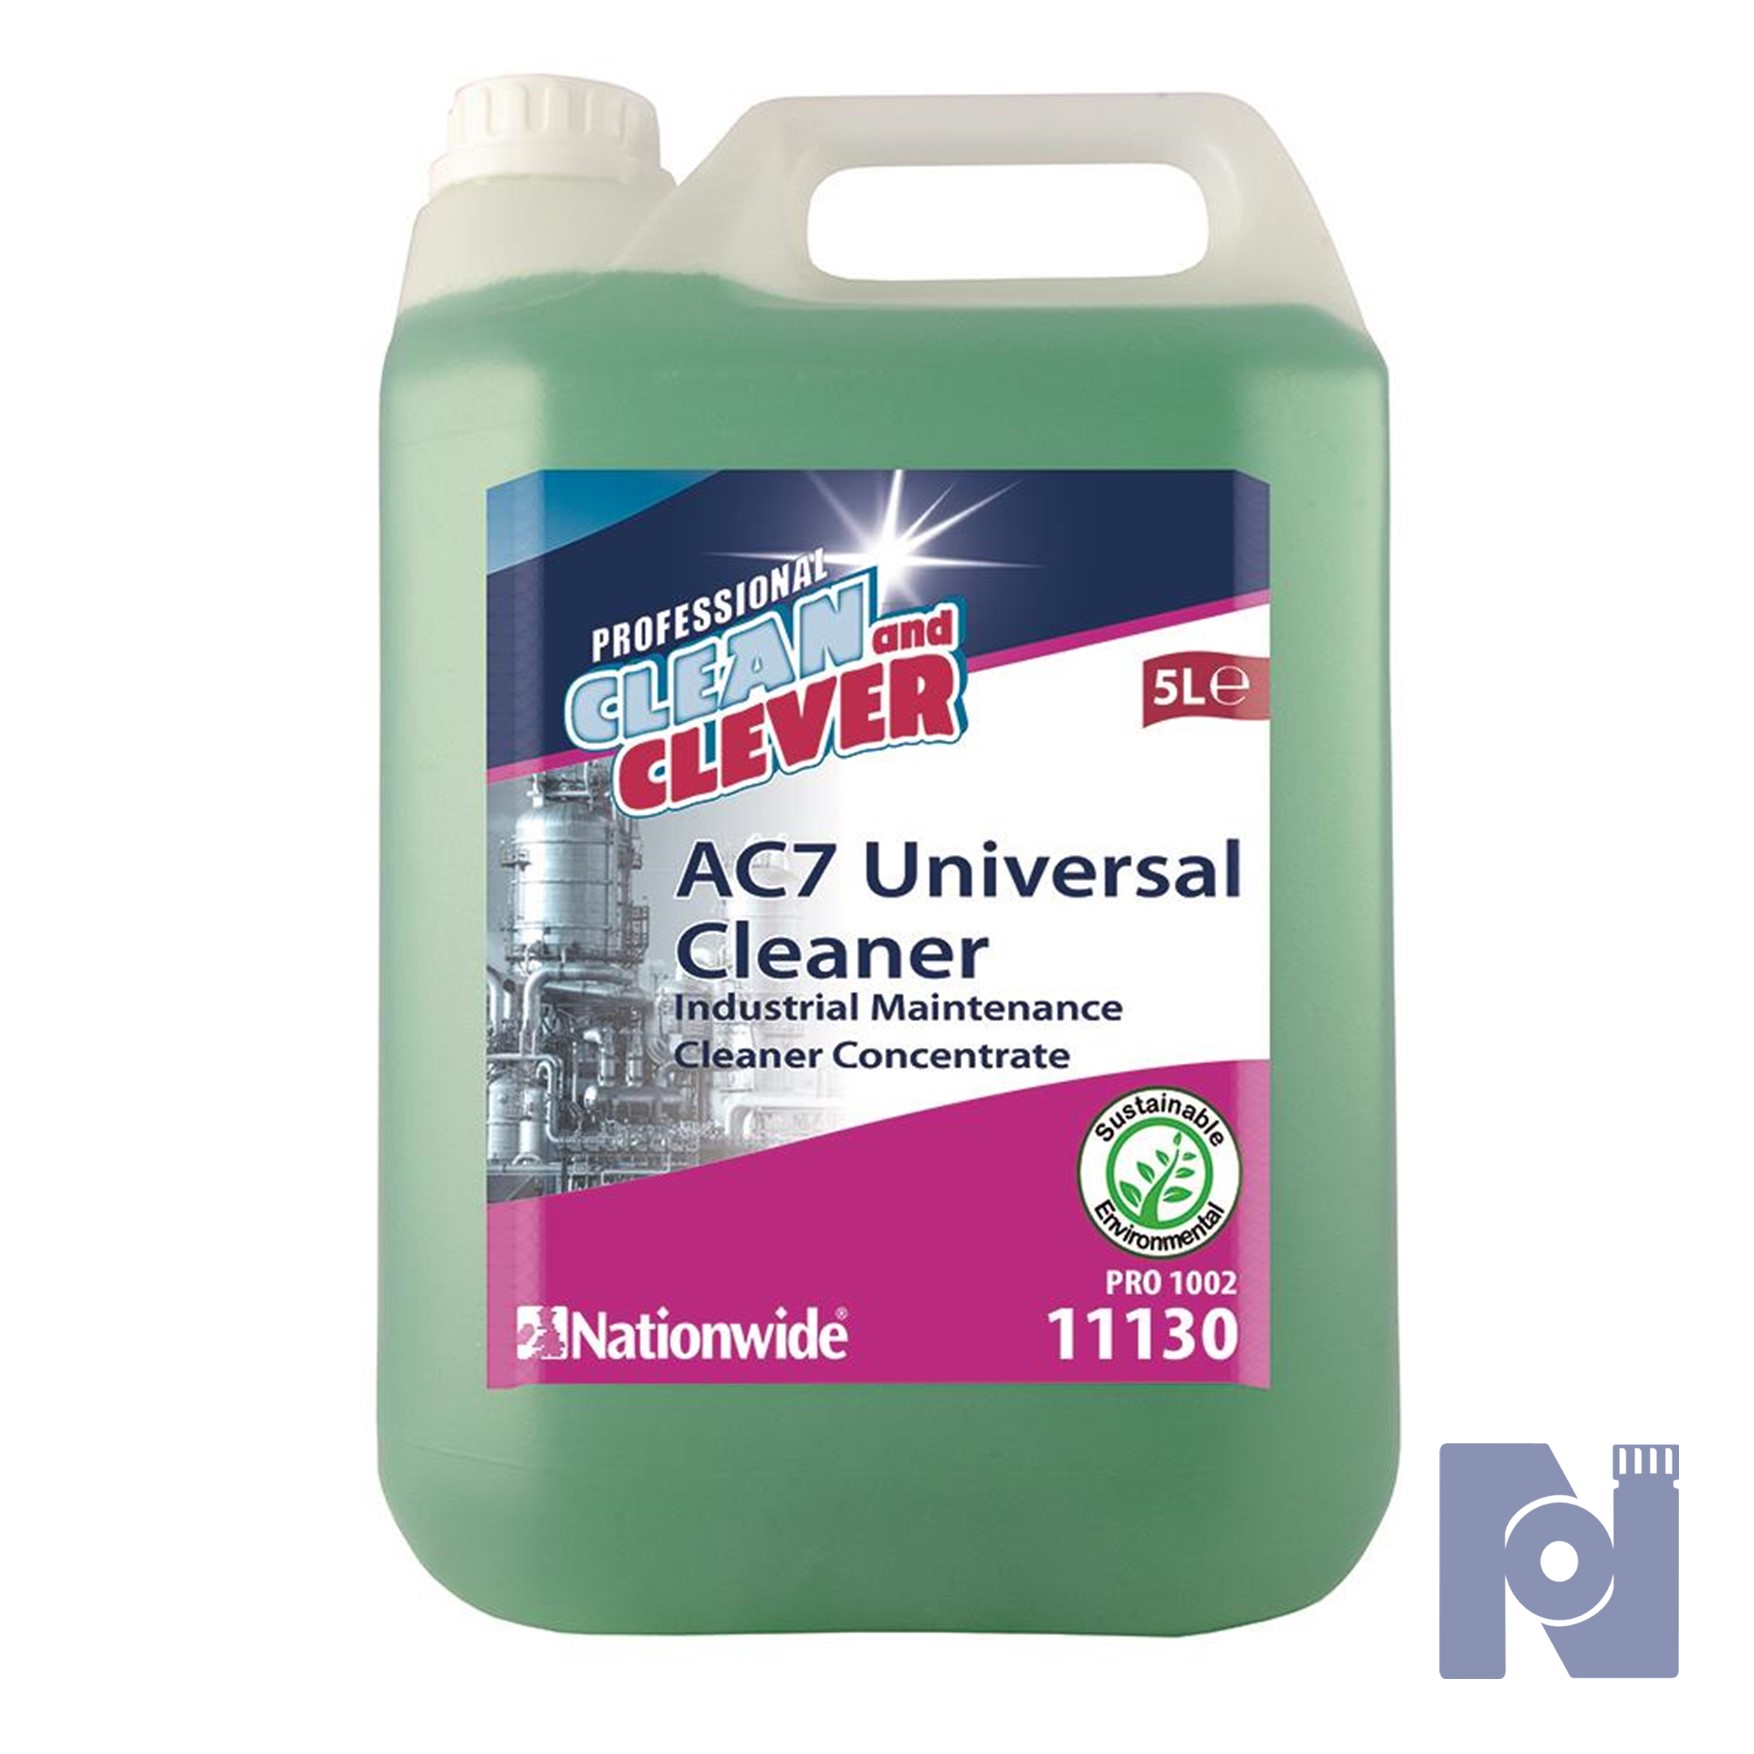 Clean & Clever AC7 Universial Cleaner